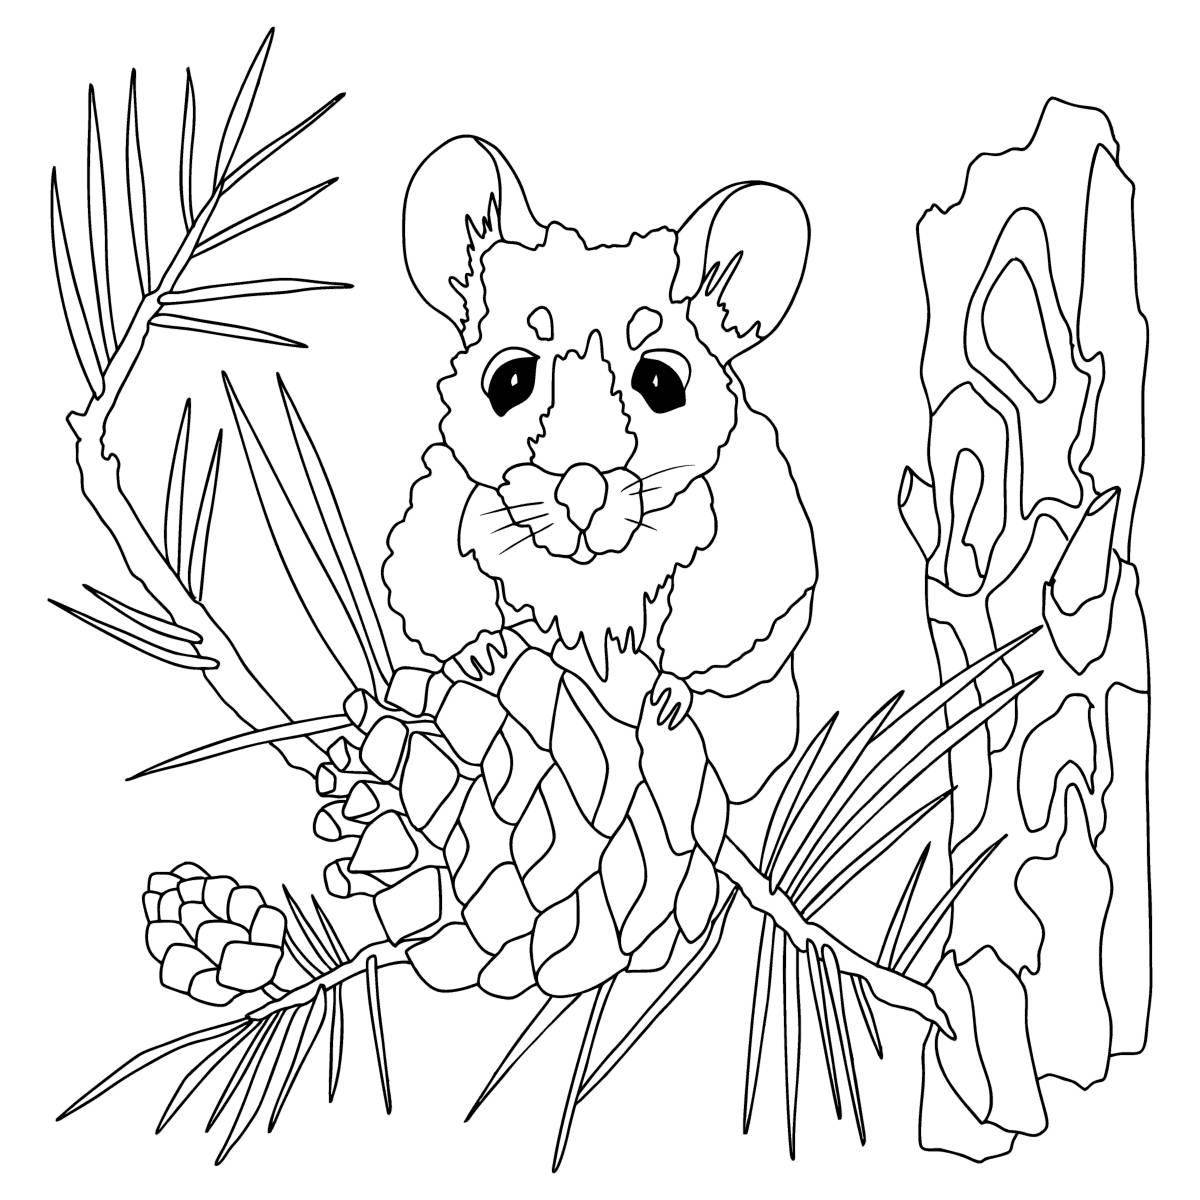 Fancy mouse coloring book for 3-4 year olds